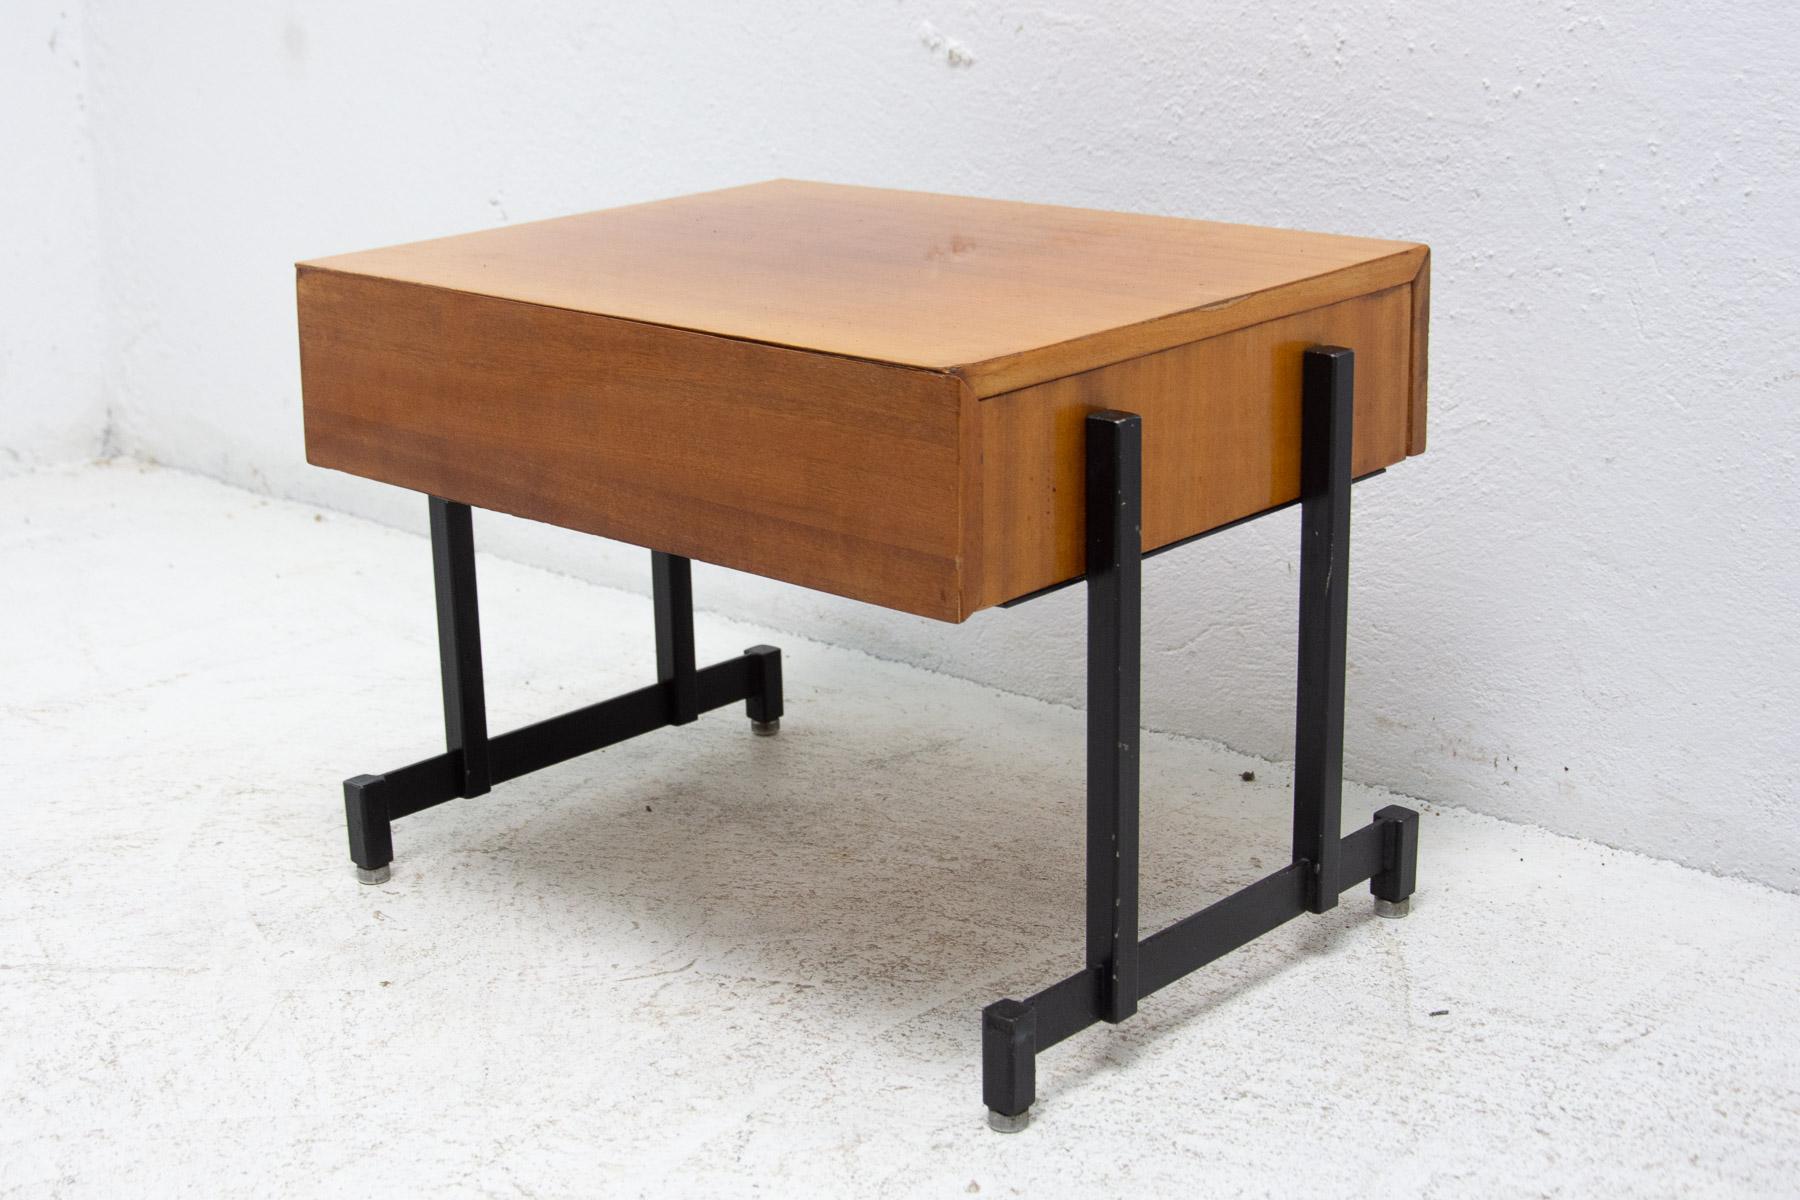 Vintage side or TV table, made in the former Czechoslovakia in the 1970´s.

It's made of mahogany and iron.

In very good Vintage condition.

Height: 38 cm
Width: 53 cm
Depth: 40 cm.